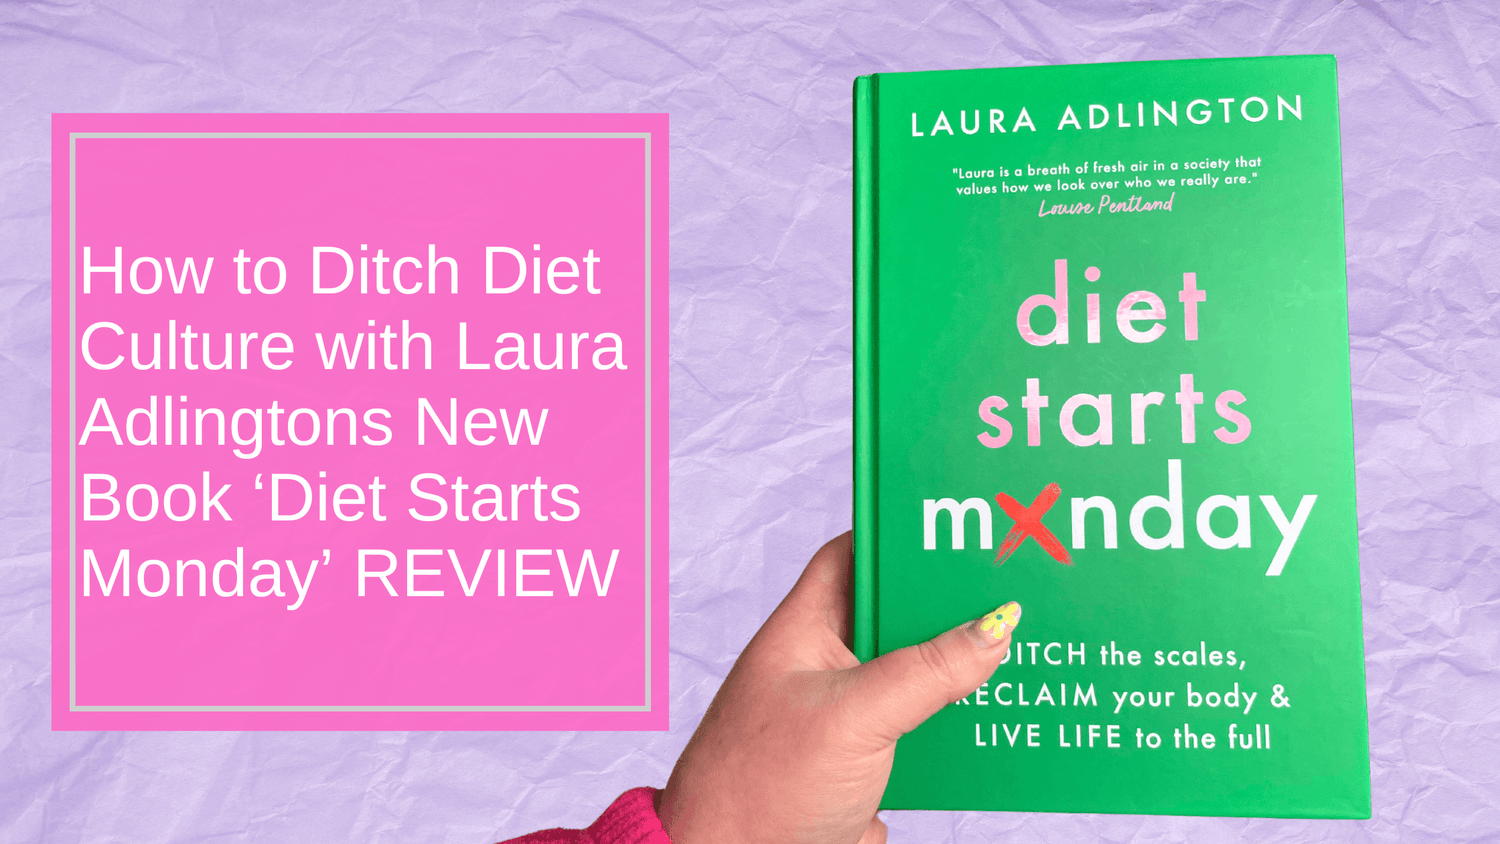 Snag Book Club: How to Ditch Diet Culture with Laura Adlingtons New Book Diet Starts Monday REVIEW - Snag